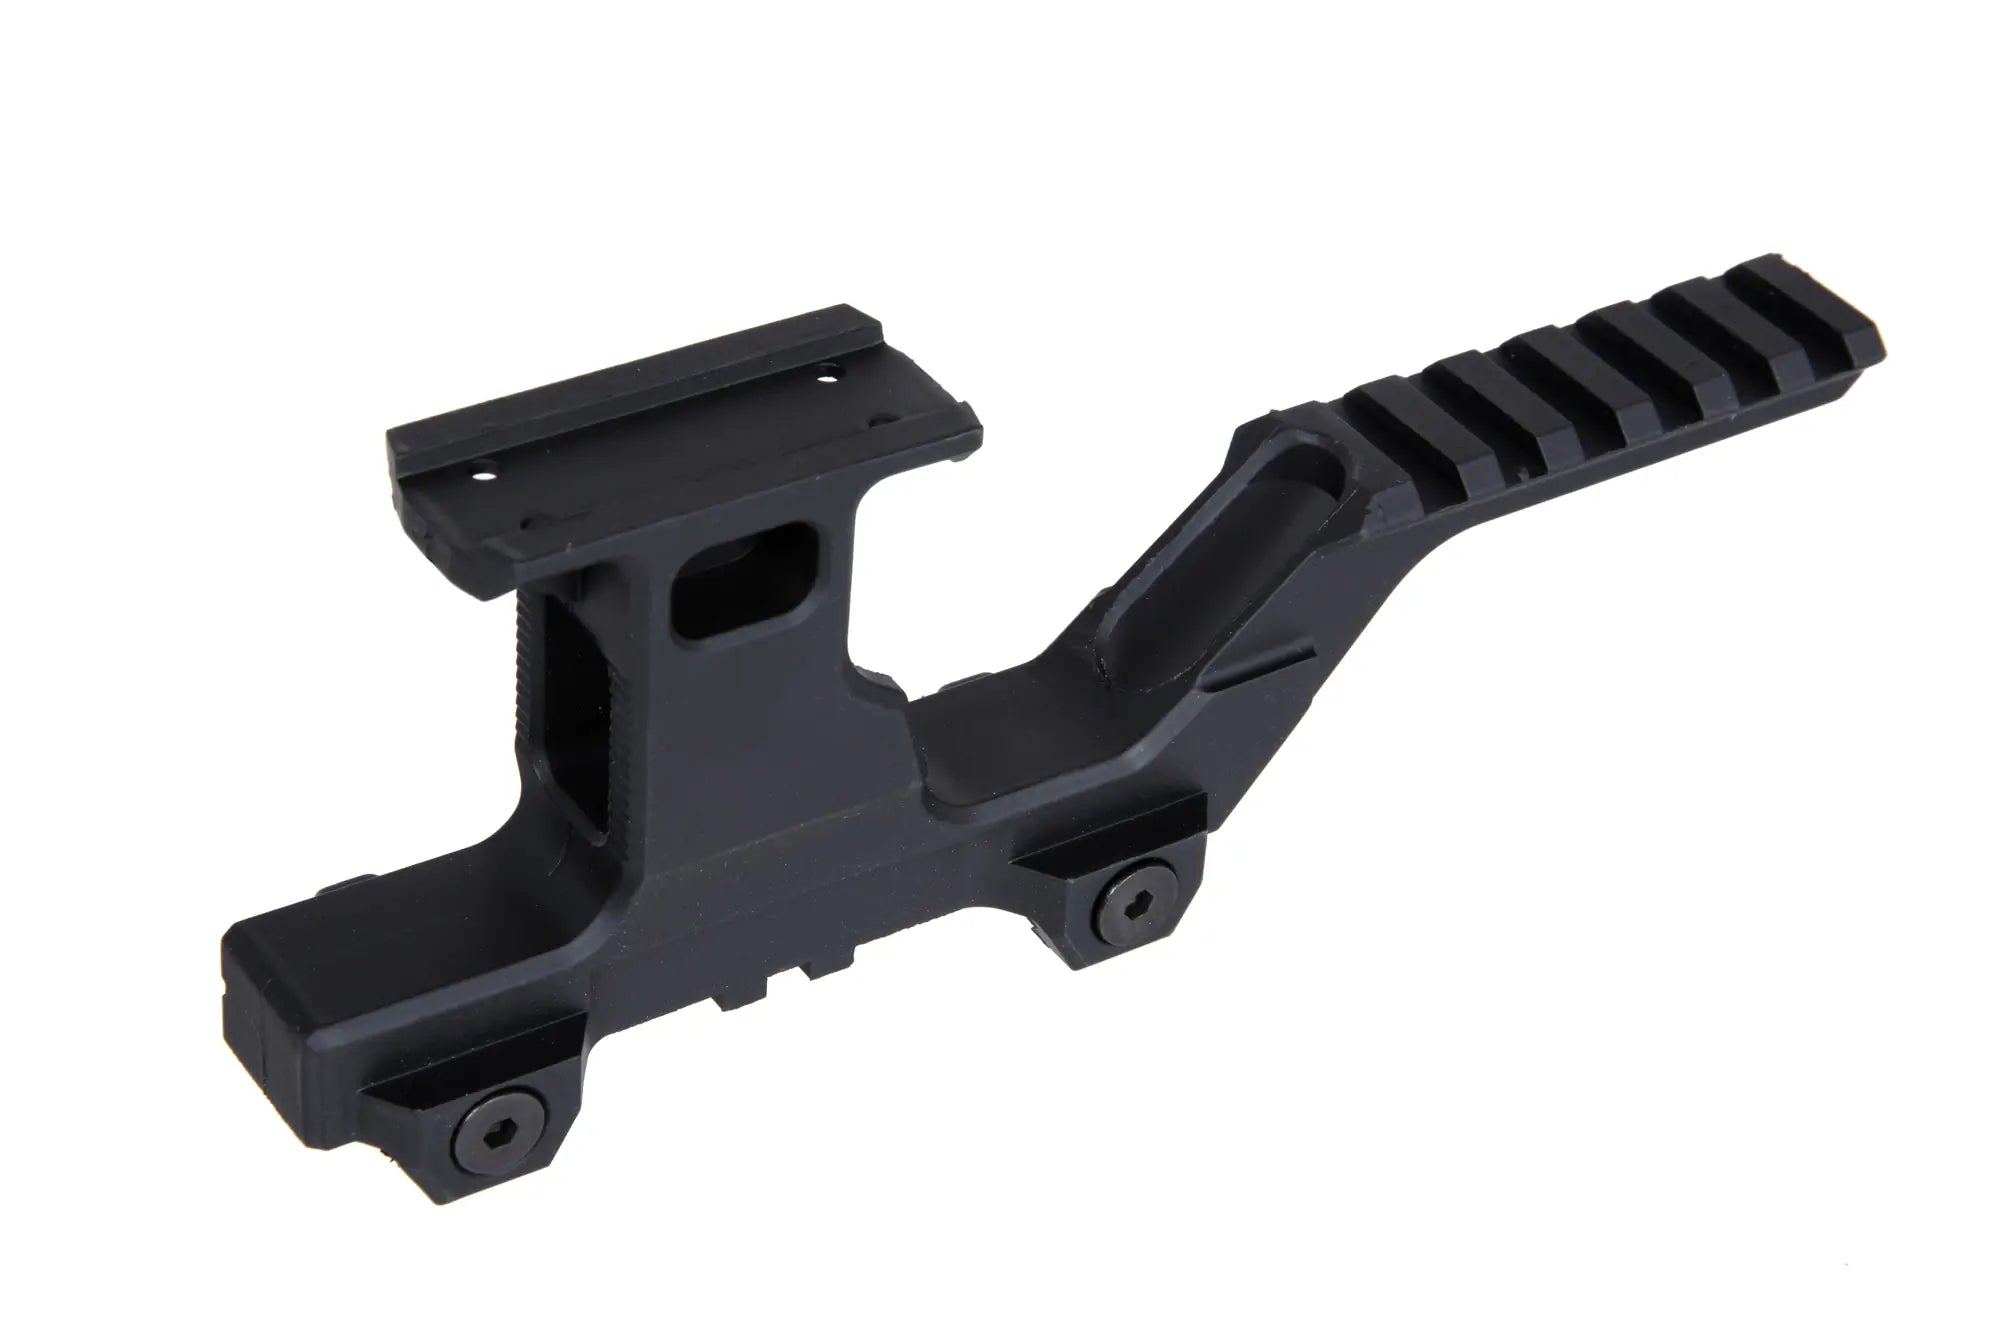 High mount for T1/T2 and PEQ collimators Primal Gear Black-1